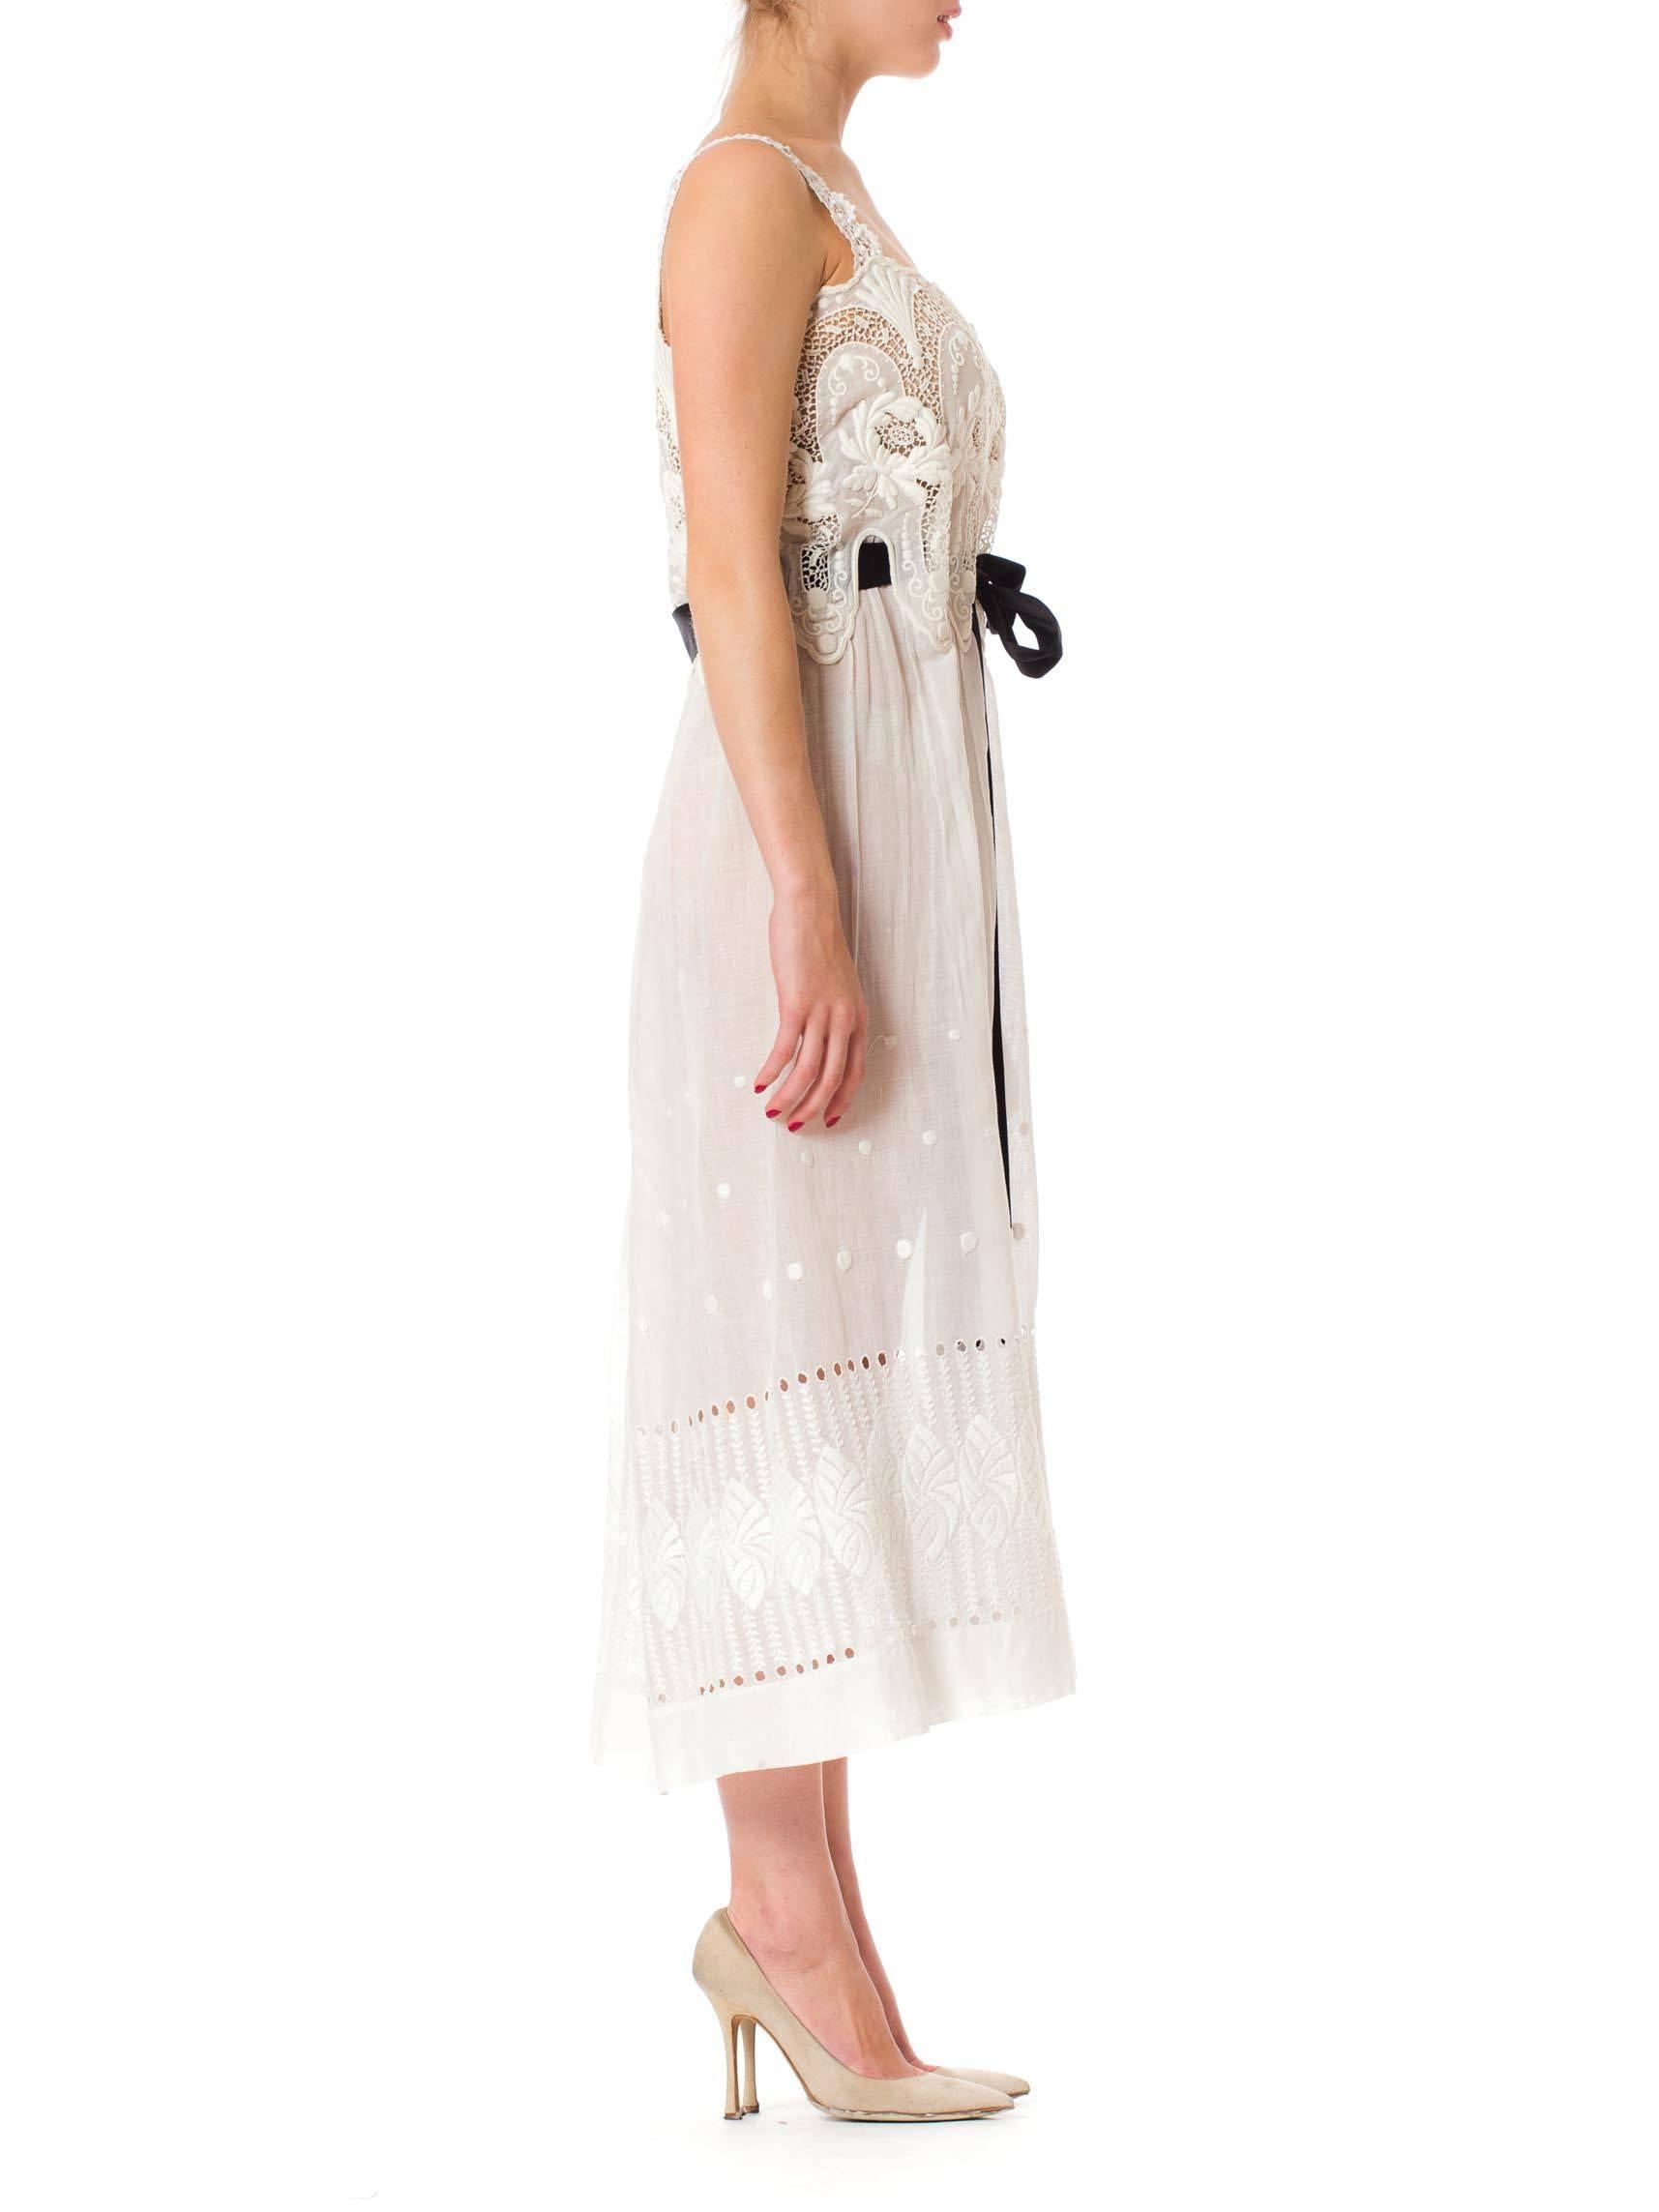 Women's MORPHEW COLLECTION White Victorian Cotton Voile Dress With Lace Details & Black